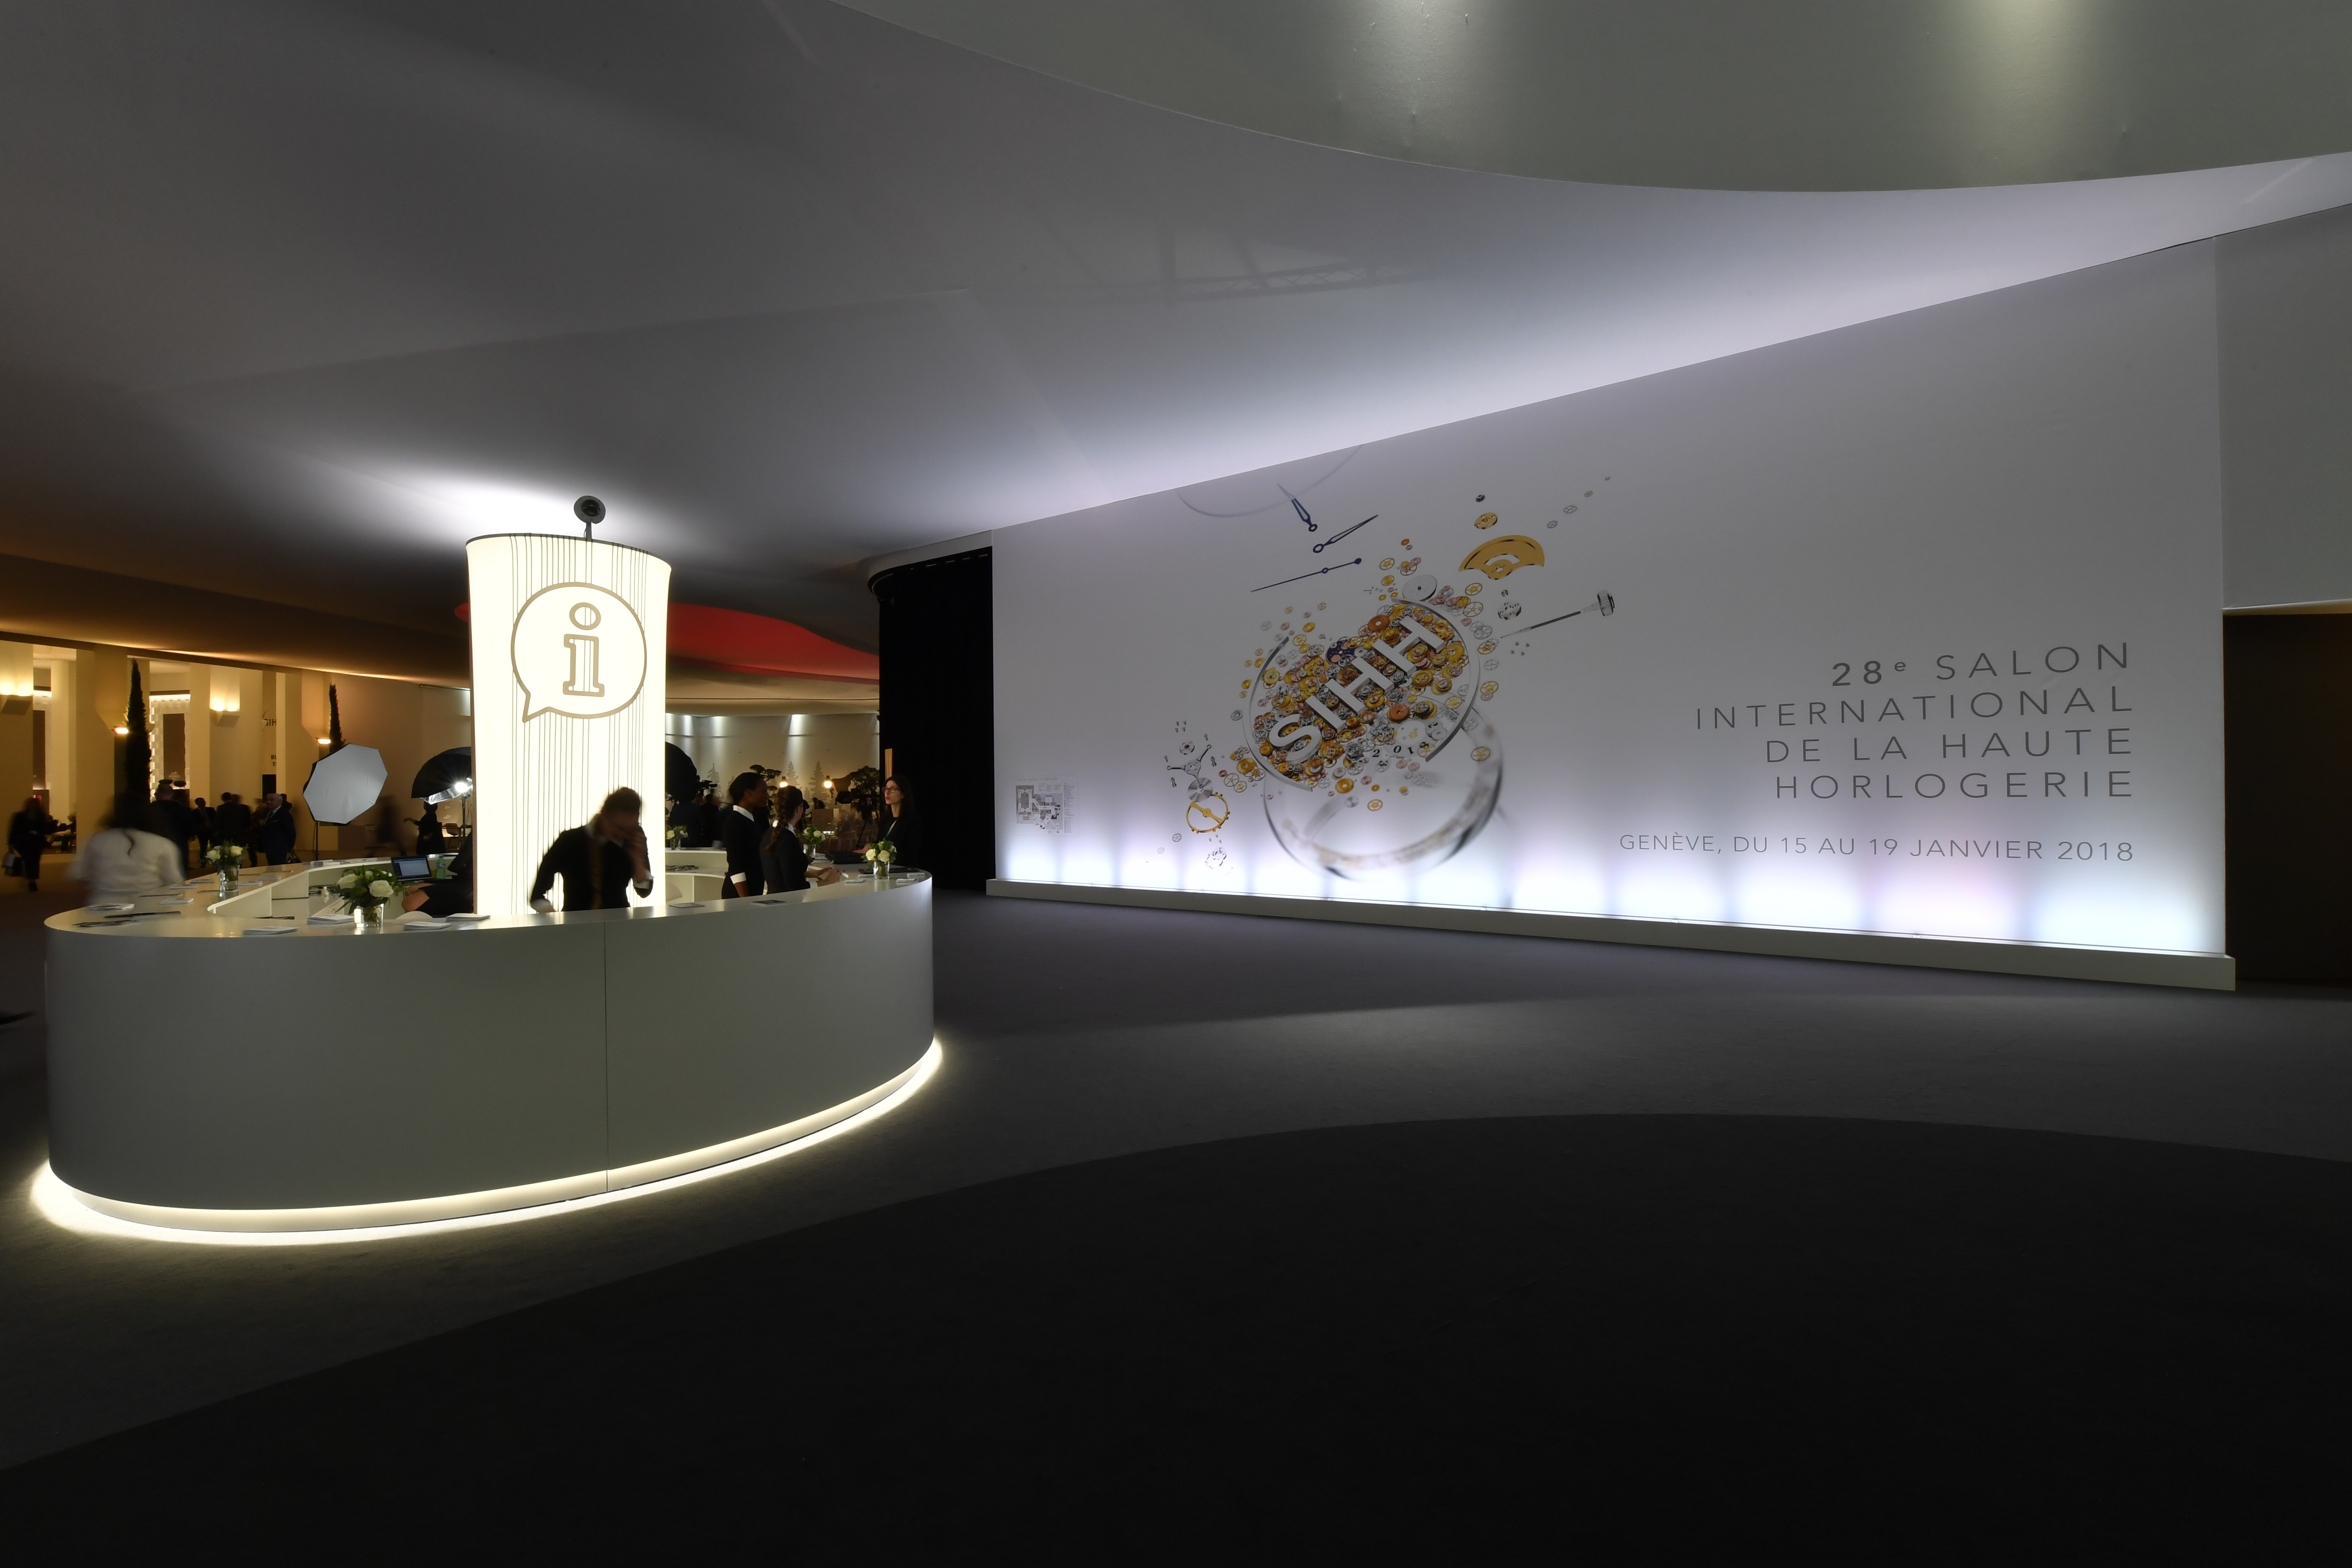 Digital-friendly facilities have become a greater feature of SIHH in recent years.